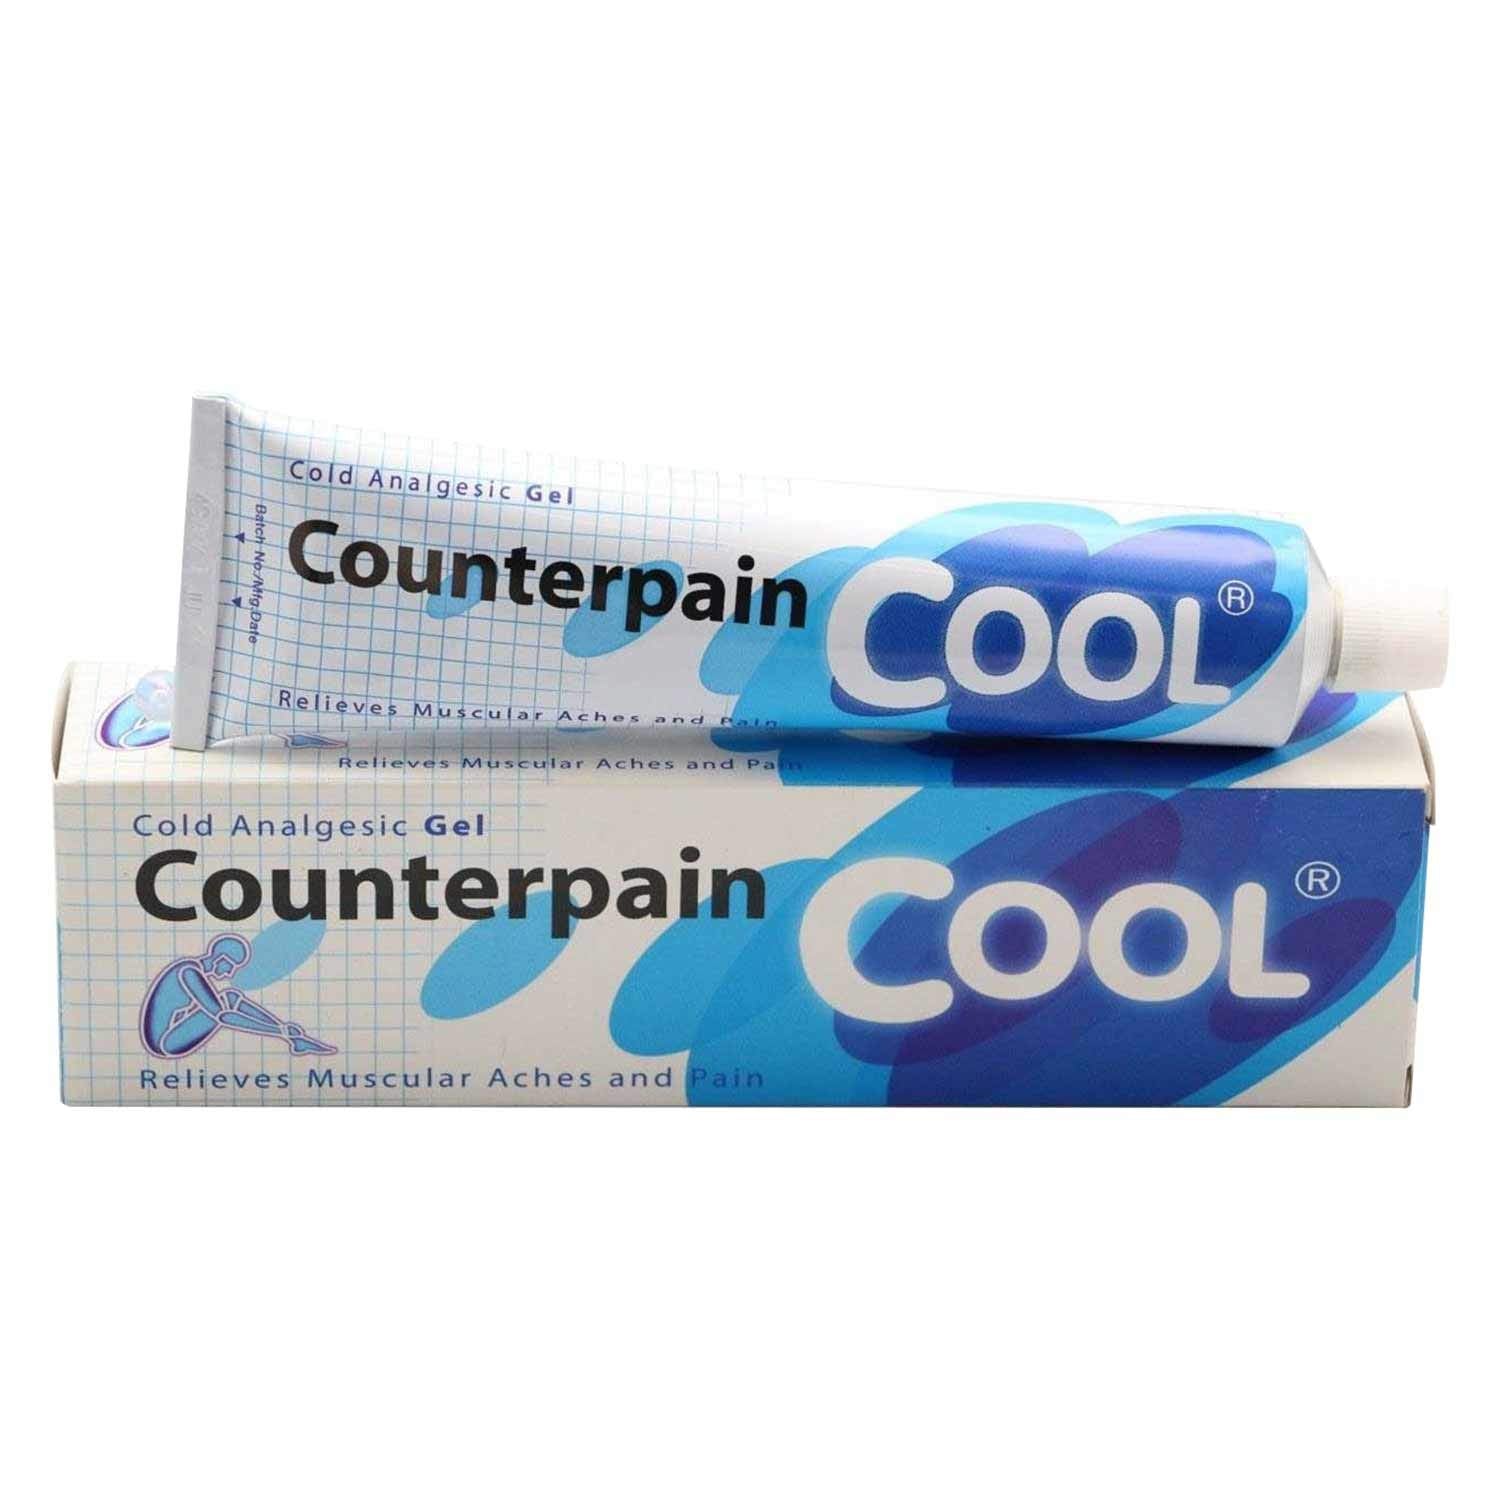 Counterpain Cool Analgesic Gel Cold (120g) Counterpain